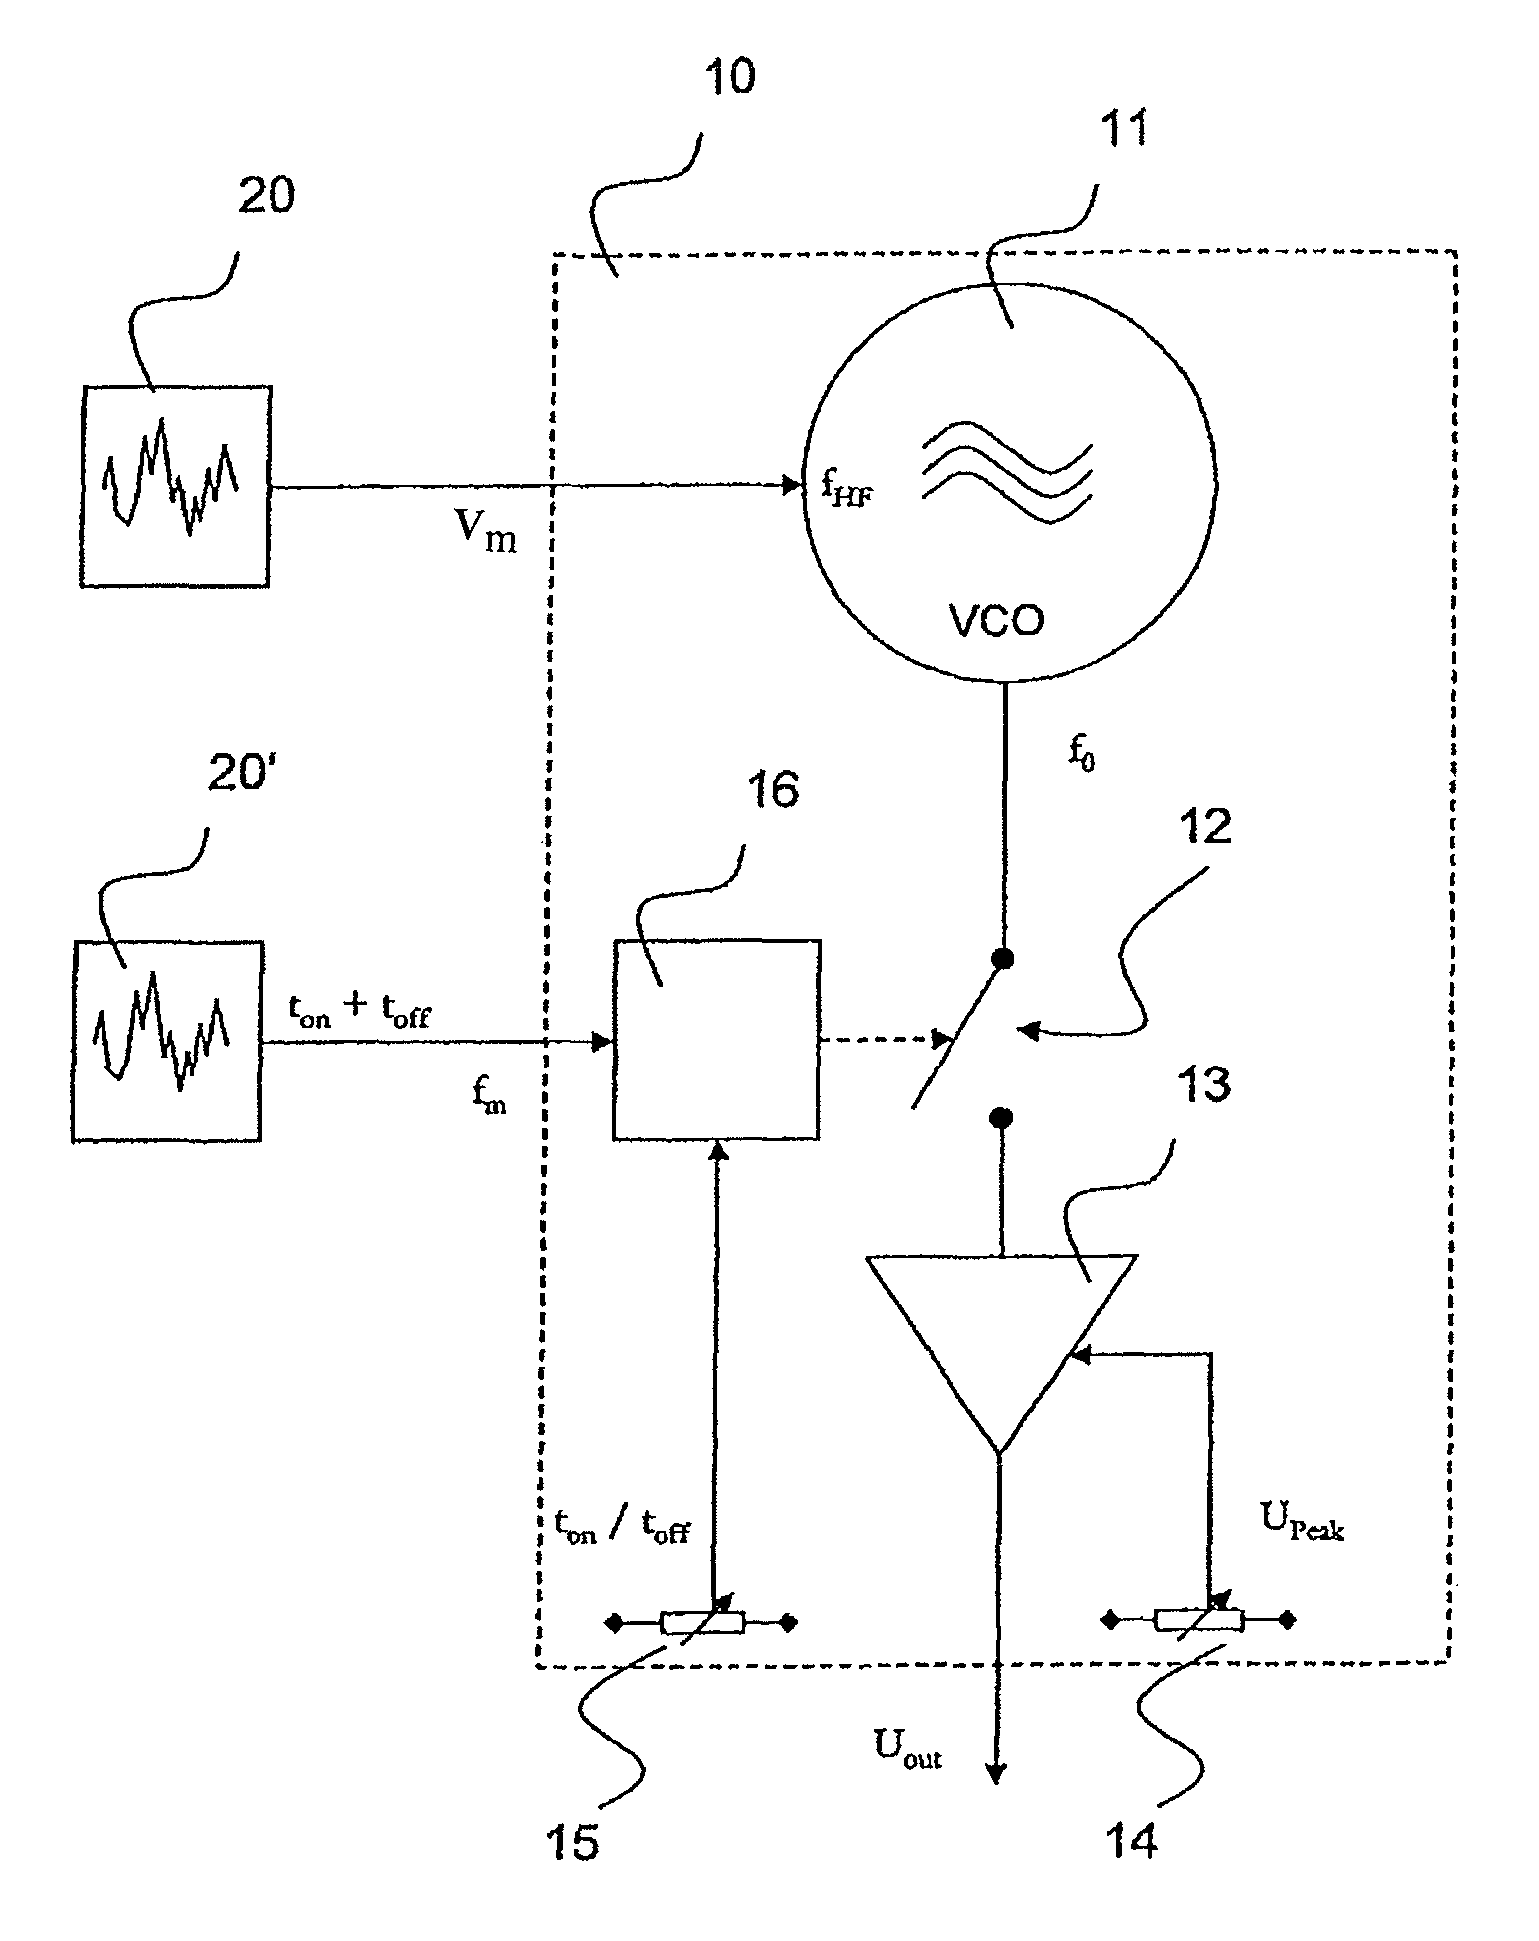 Method for controlling an electro-surgical HF generator and electro-surgical device